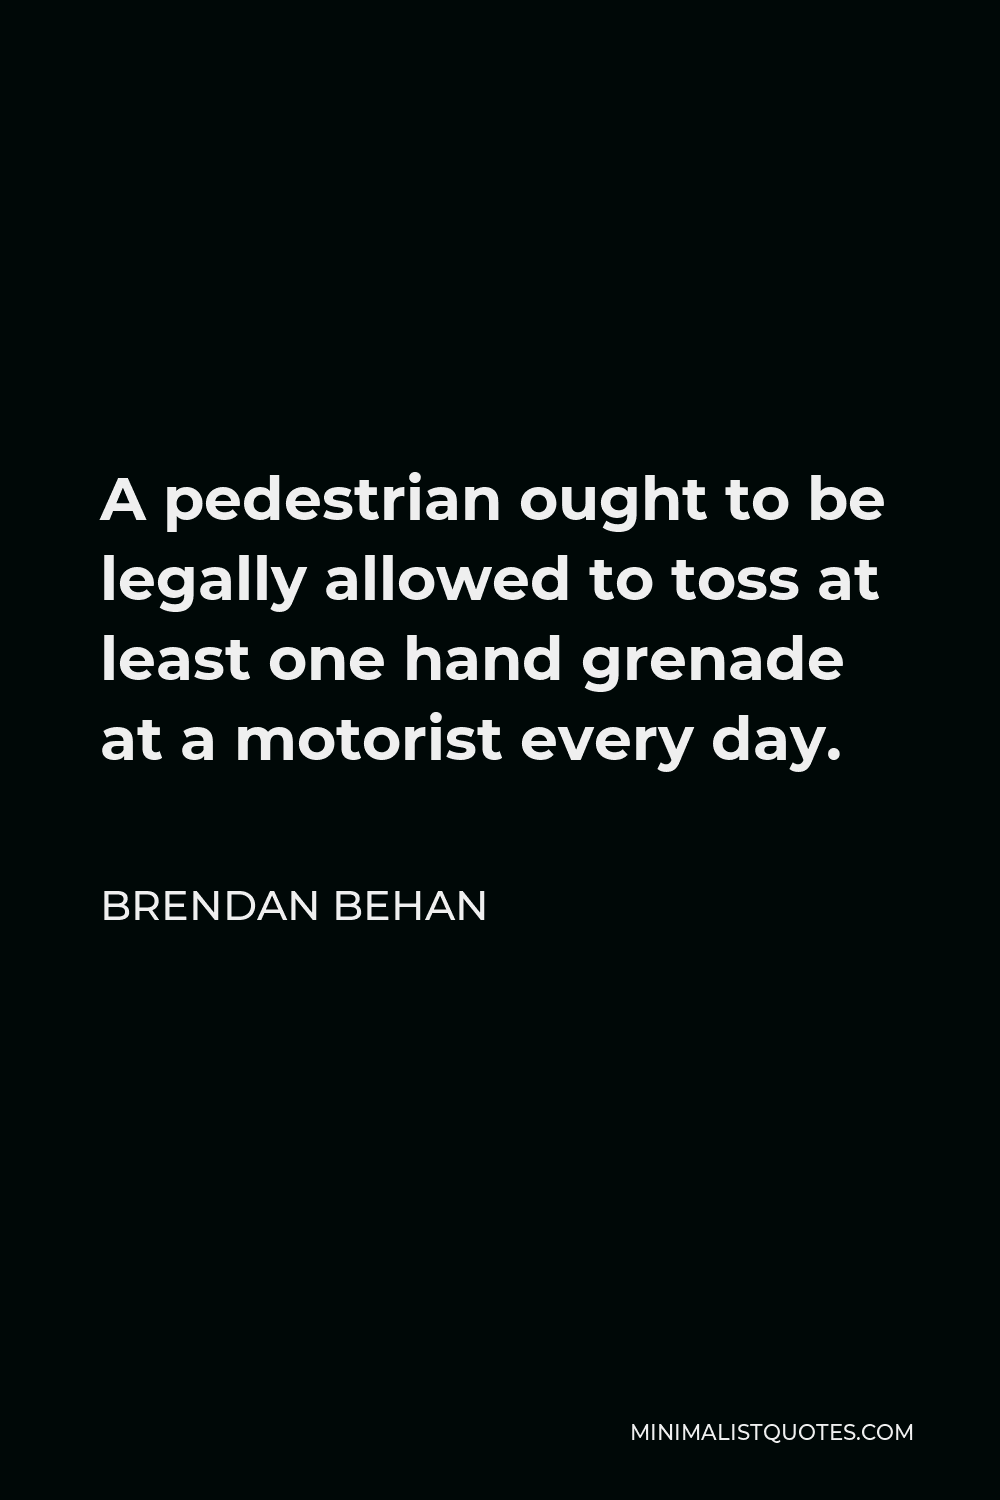 Brendan Behan Quote - A pedestrian ought to be legally allowed to toss at least one hand grenade at a motorist every day.